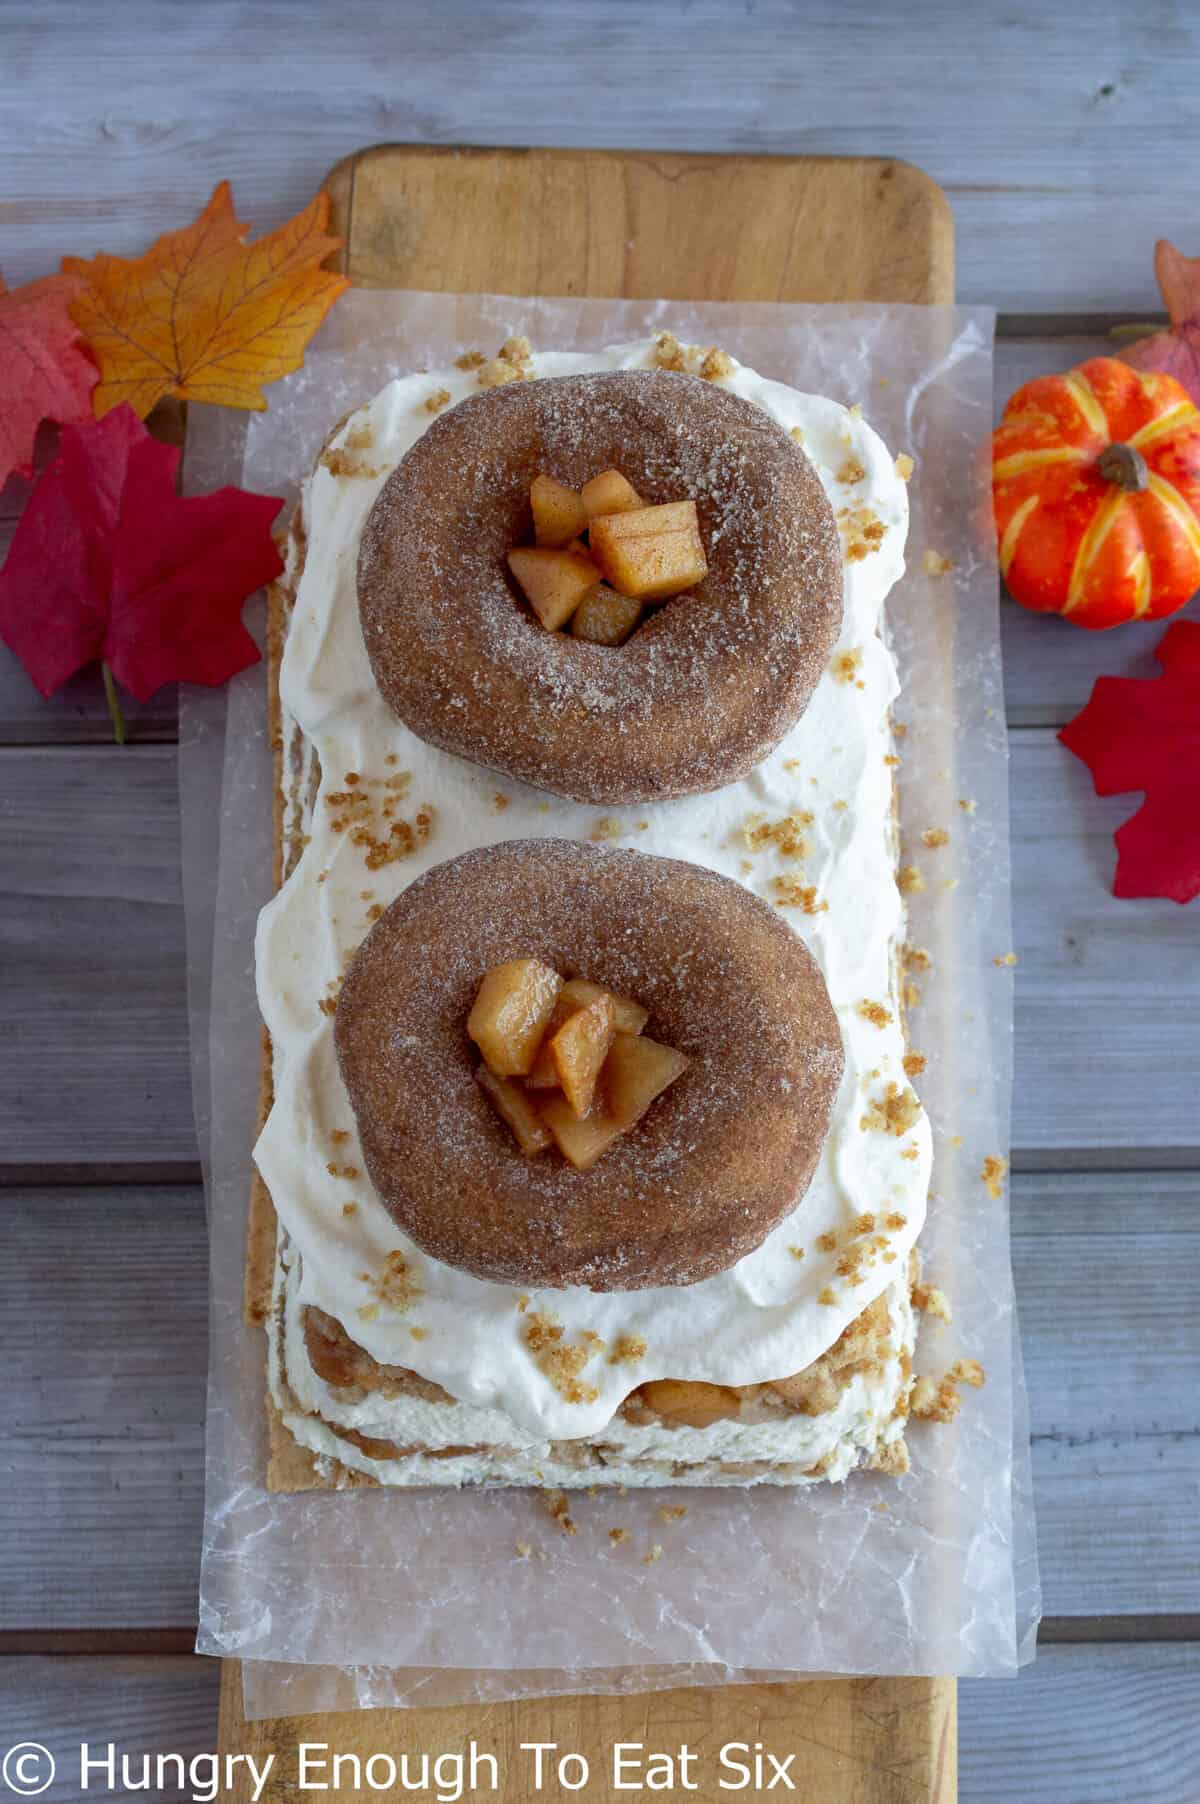 Donuts on top of an icebox cake with cream and apples.